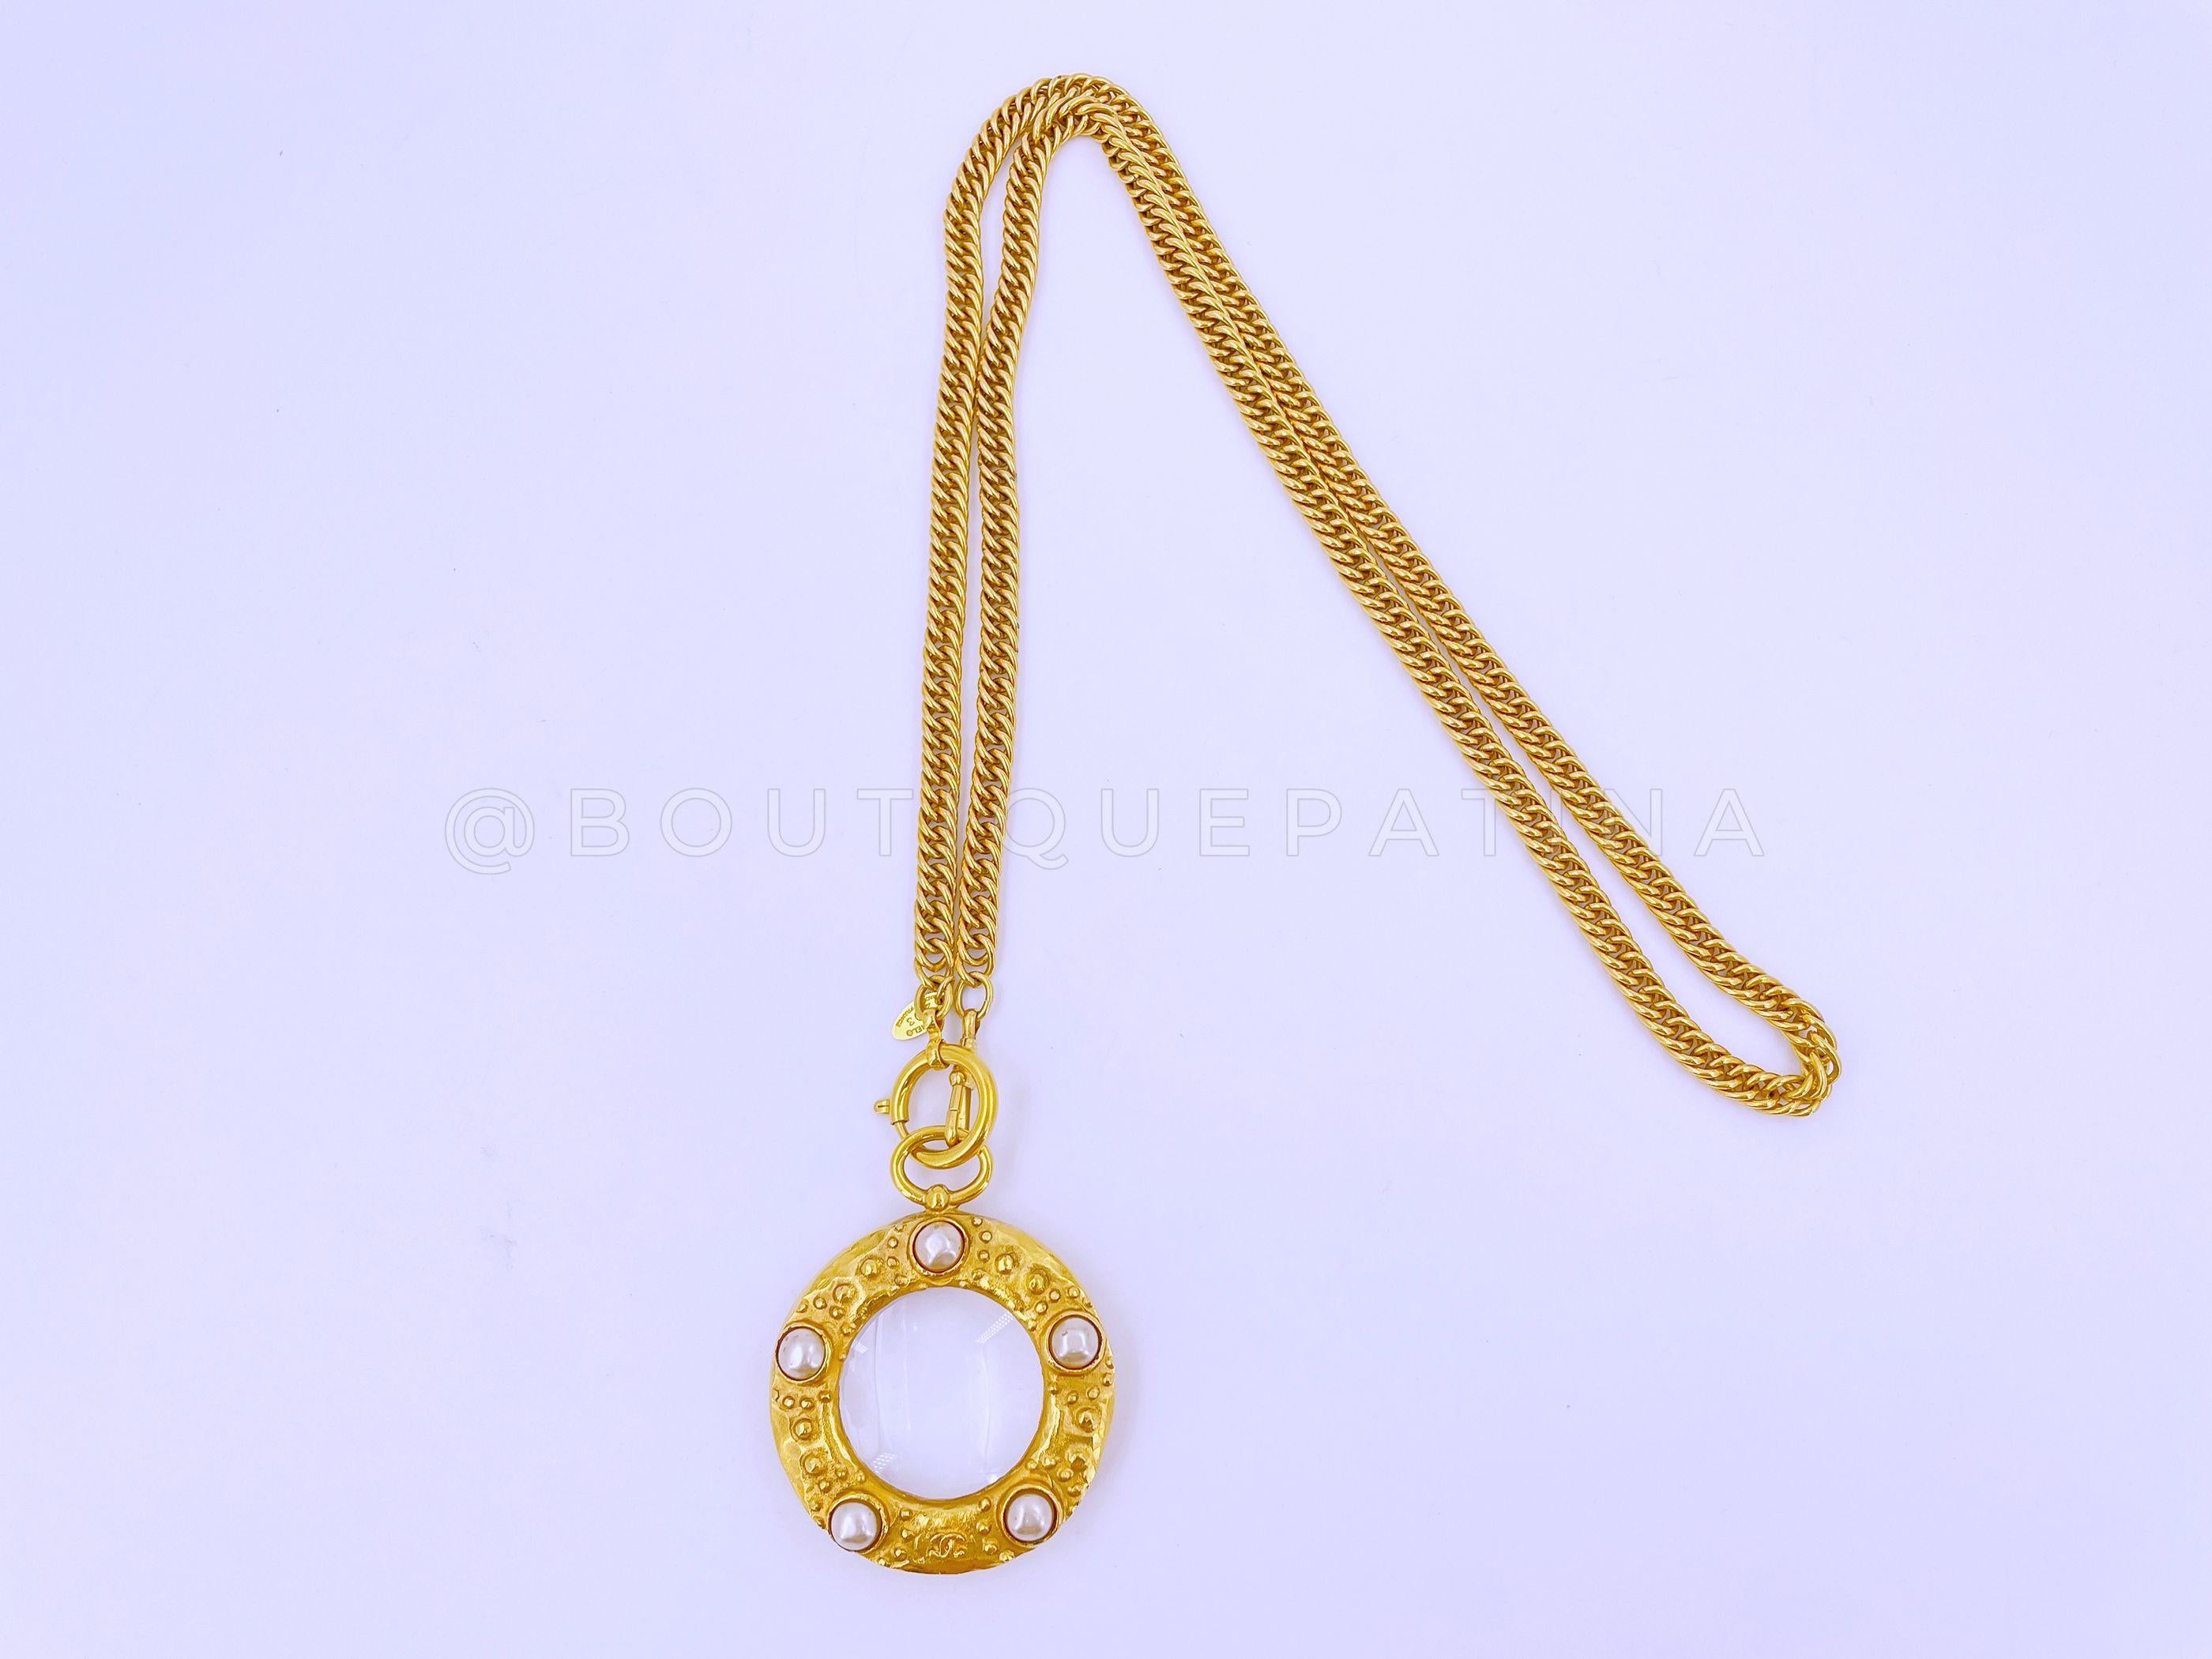 Store SKU: 65610
Chanel Vintage Collection 23 Pearl Studded Magnifying Glass Pendant Long Chain Necklace brushed gold and faux pearl studs from 1990

Measures 35 inches; chain is detachable, can be doubled

Condition: Excellent
For 19 years,